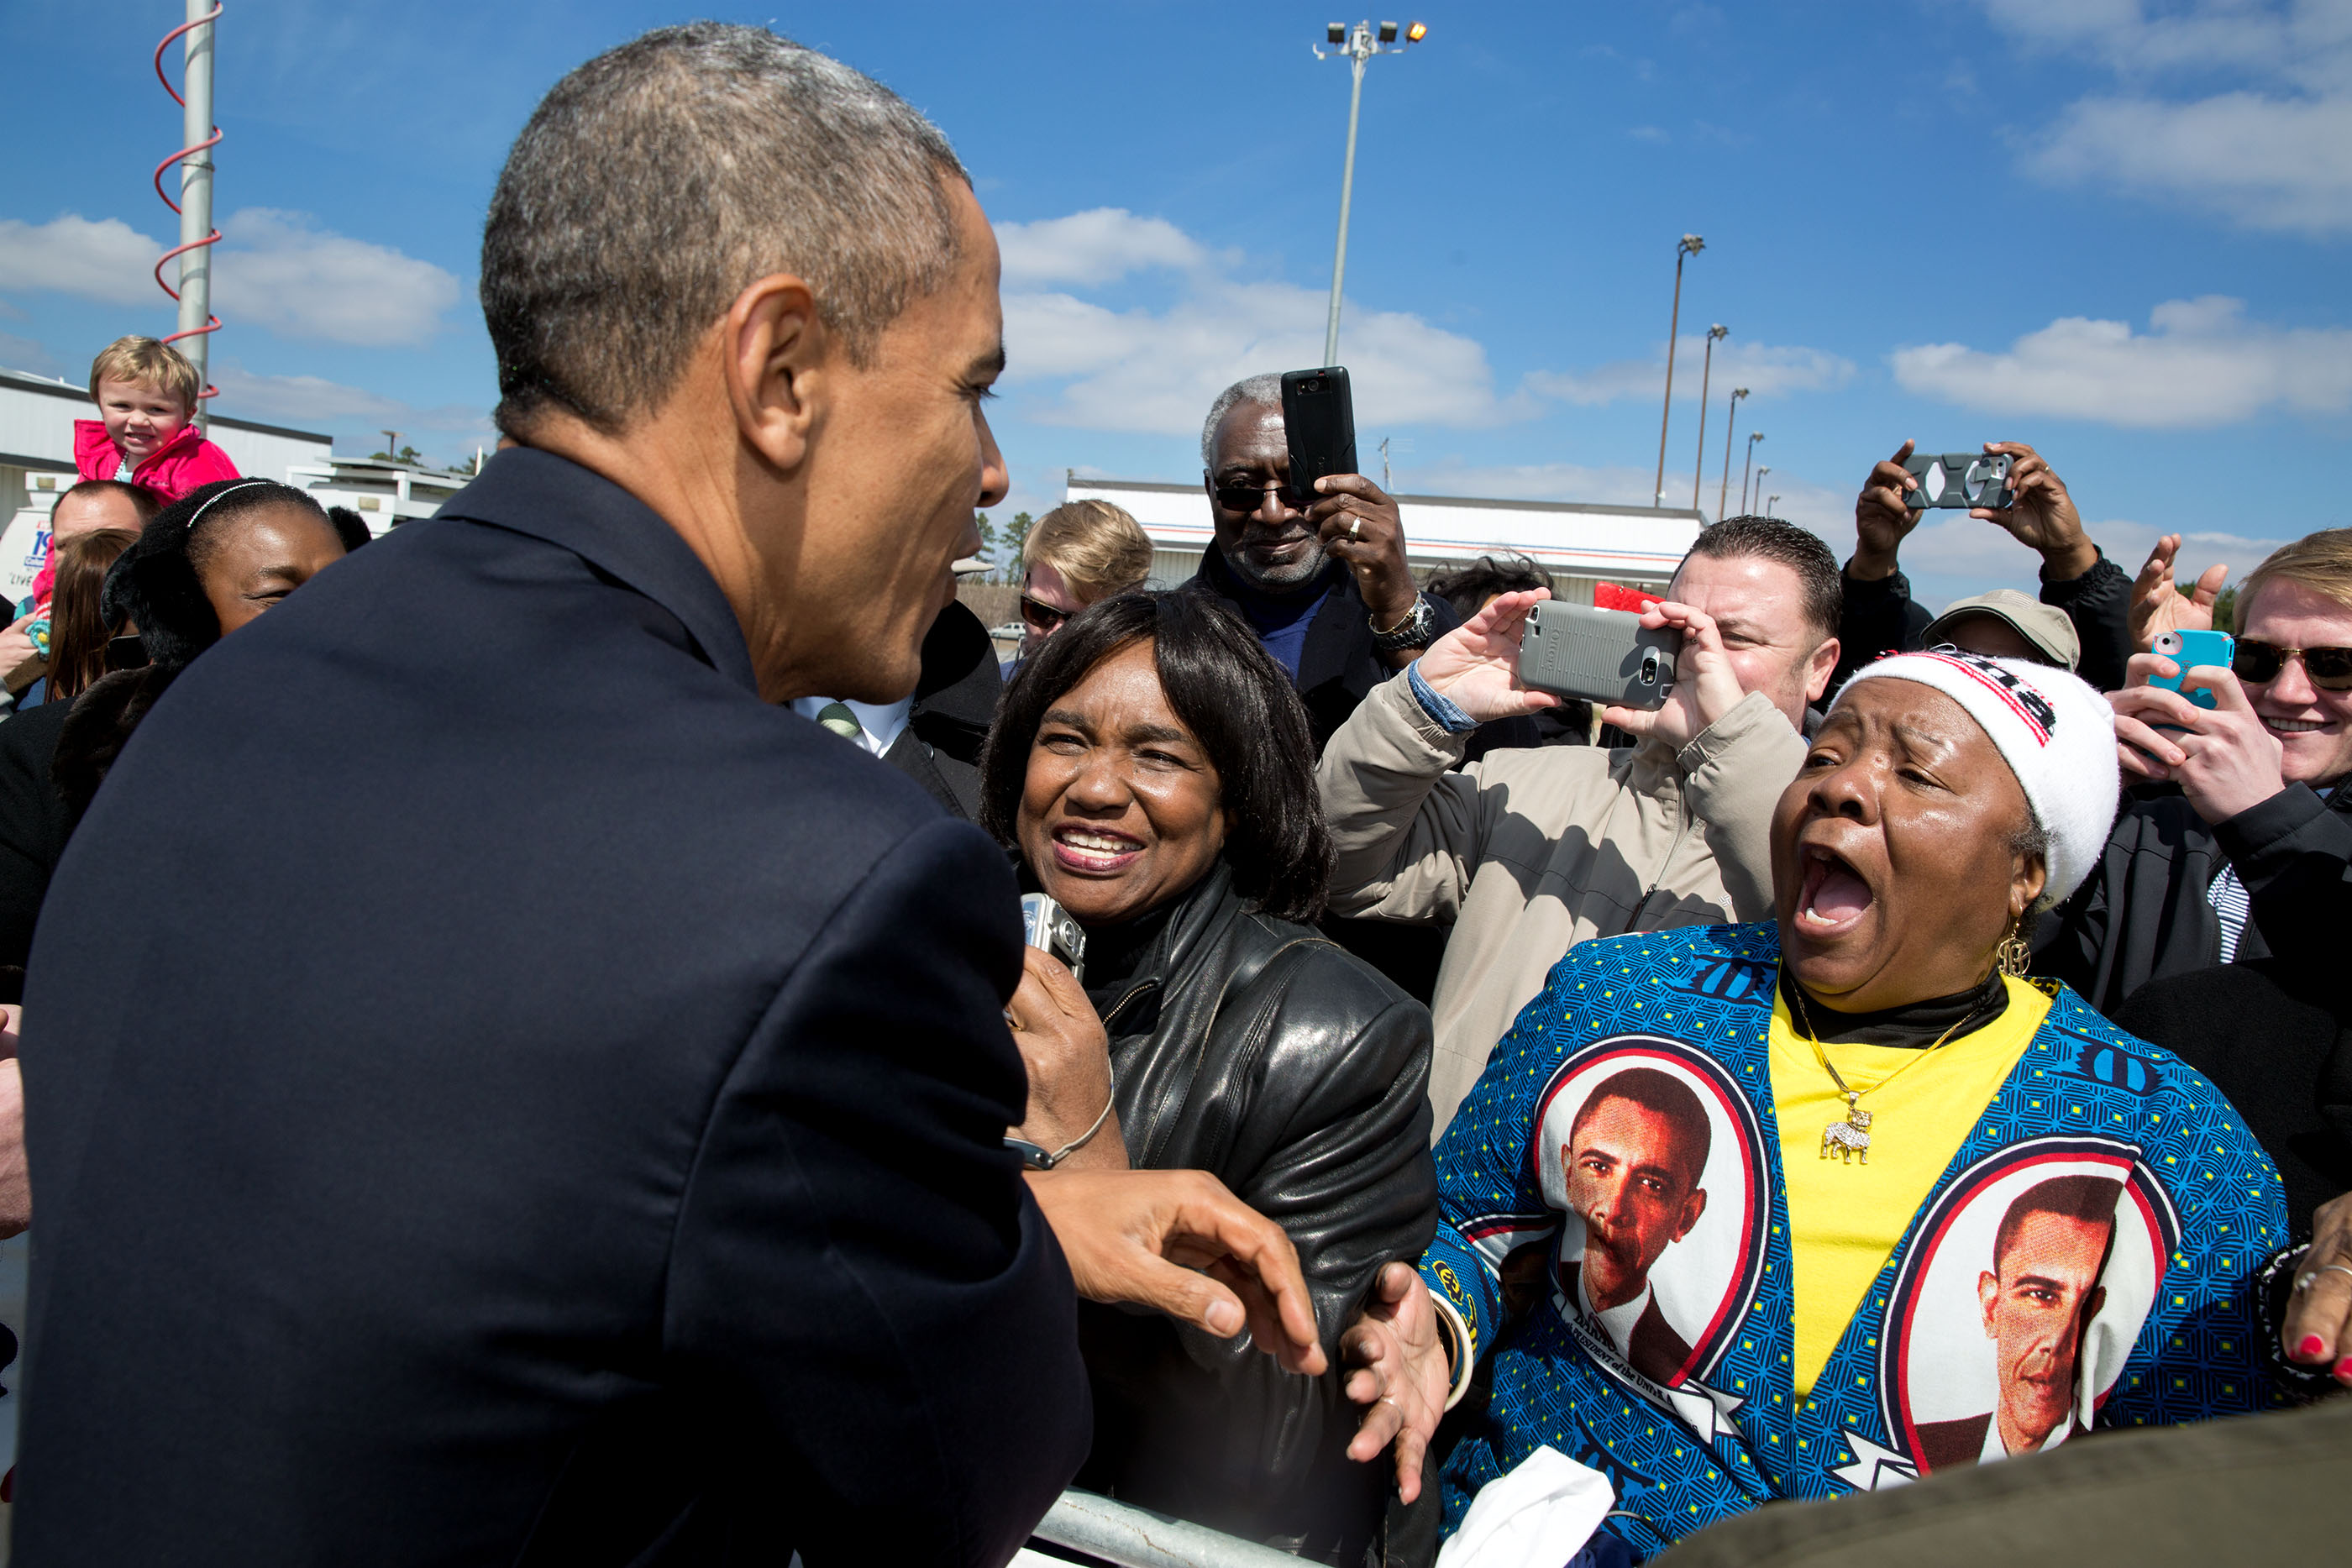 South Carolina, March 6, 2015. Reacting to an enthusiastic greeter at Columbia Metropolitan Airport. (Official White House Photo by Pete Souza)